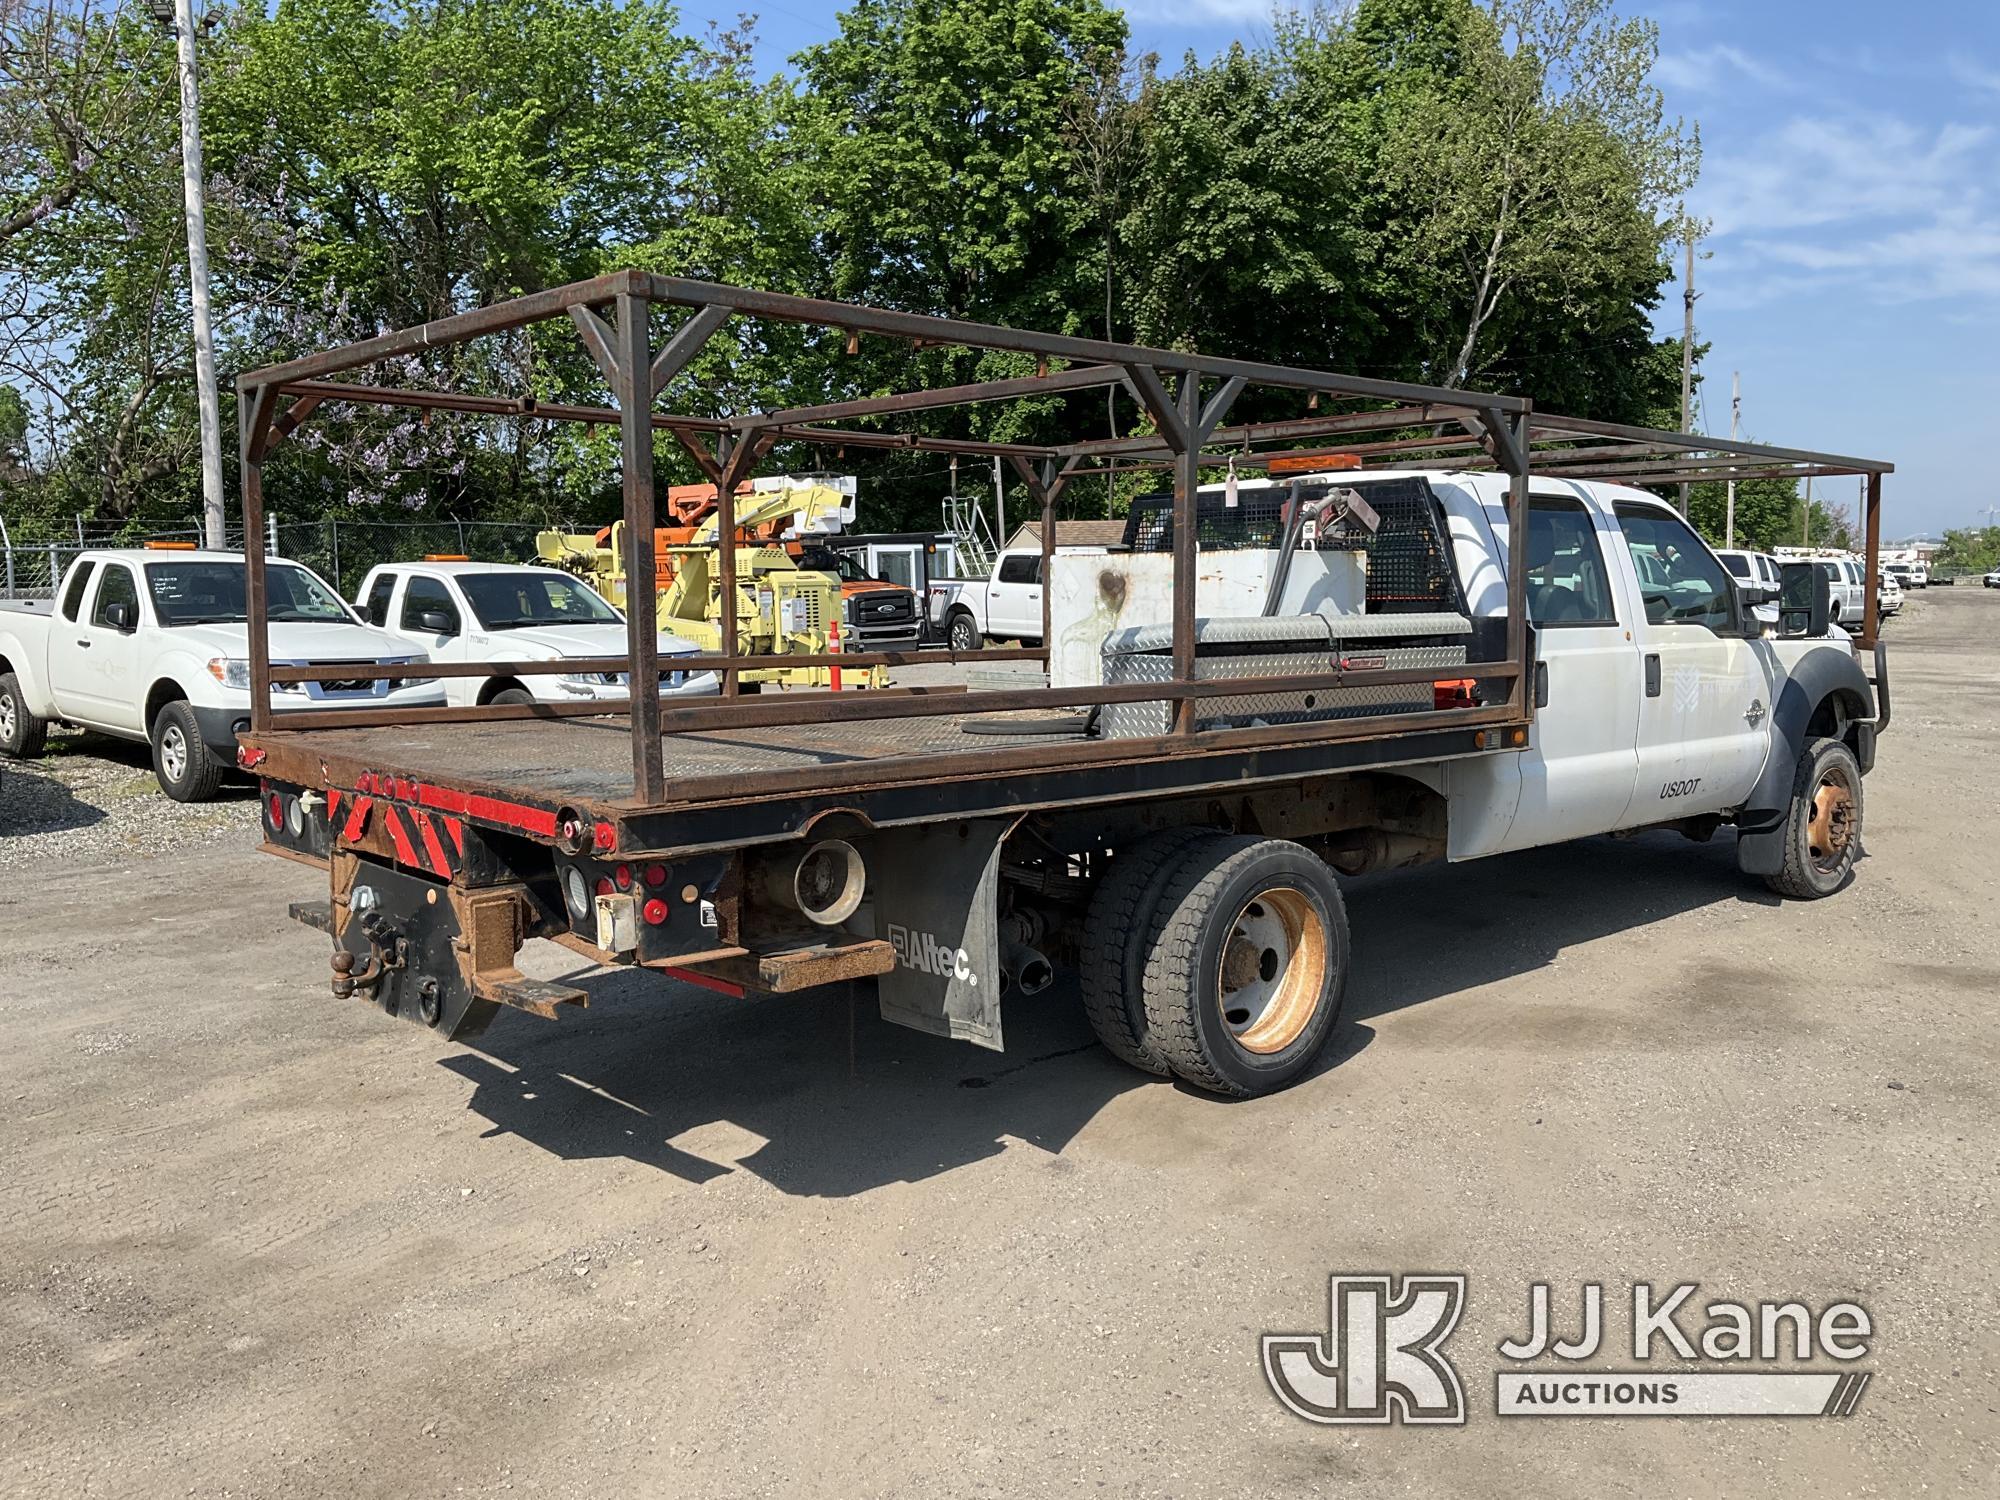 (Plymouth Meeting, PA) 2012 Ford F450 4x4 Crew-Cab Flatbed Truck Runs & Moves,Body & Rust Damage, Se